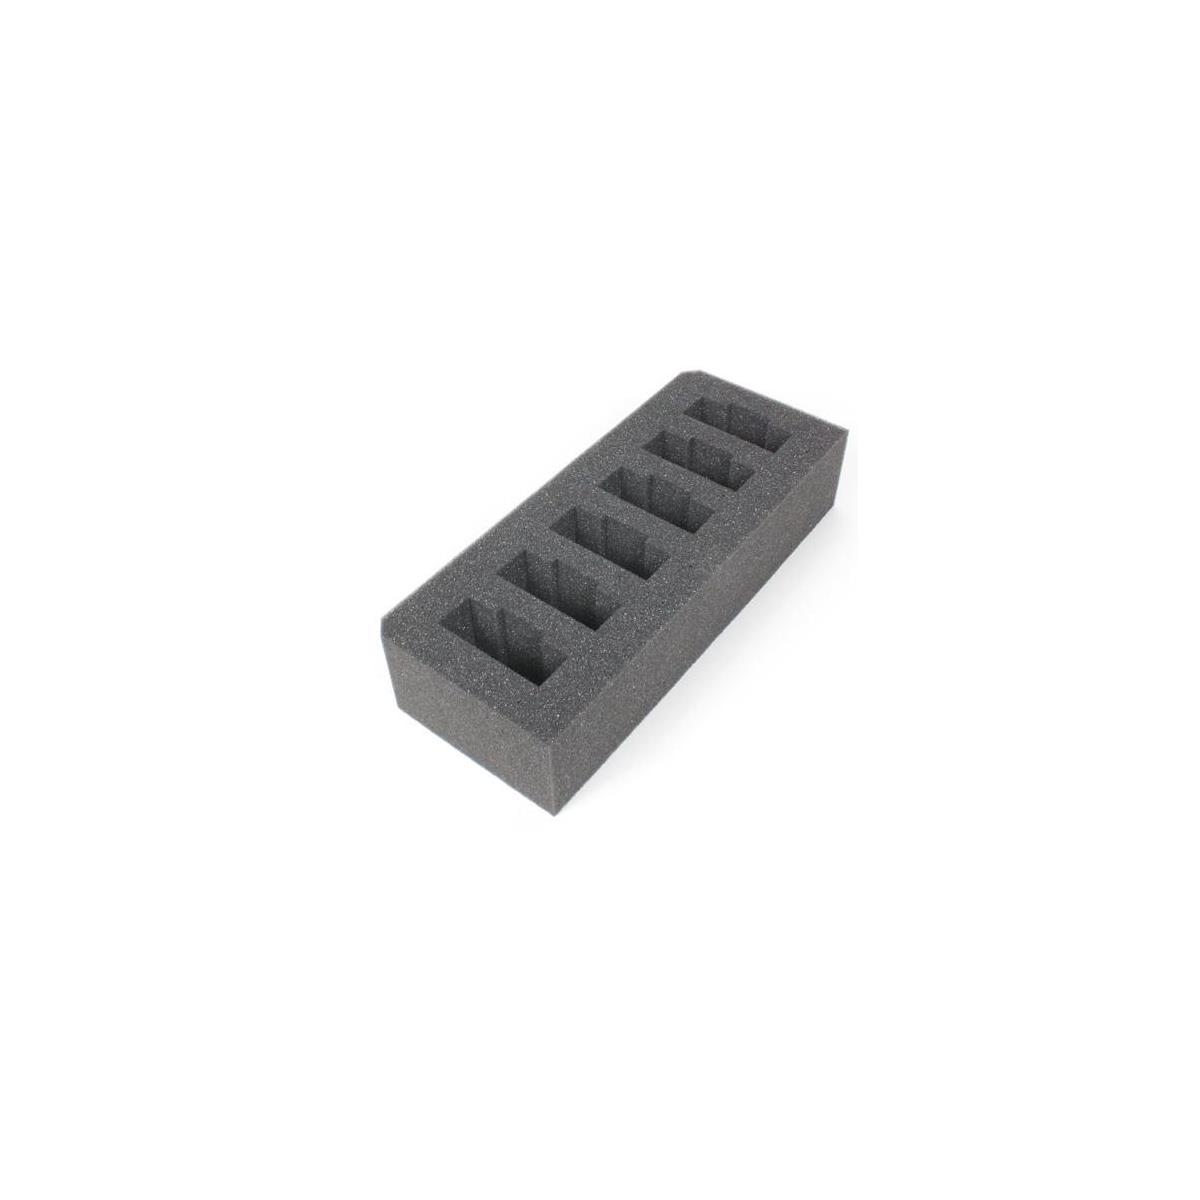 Image of Williams Sound 6-slot Foam Insert for CCS 029 Small Briefcase